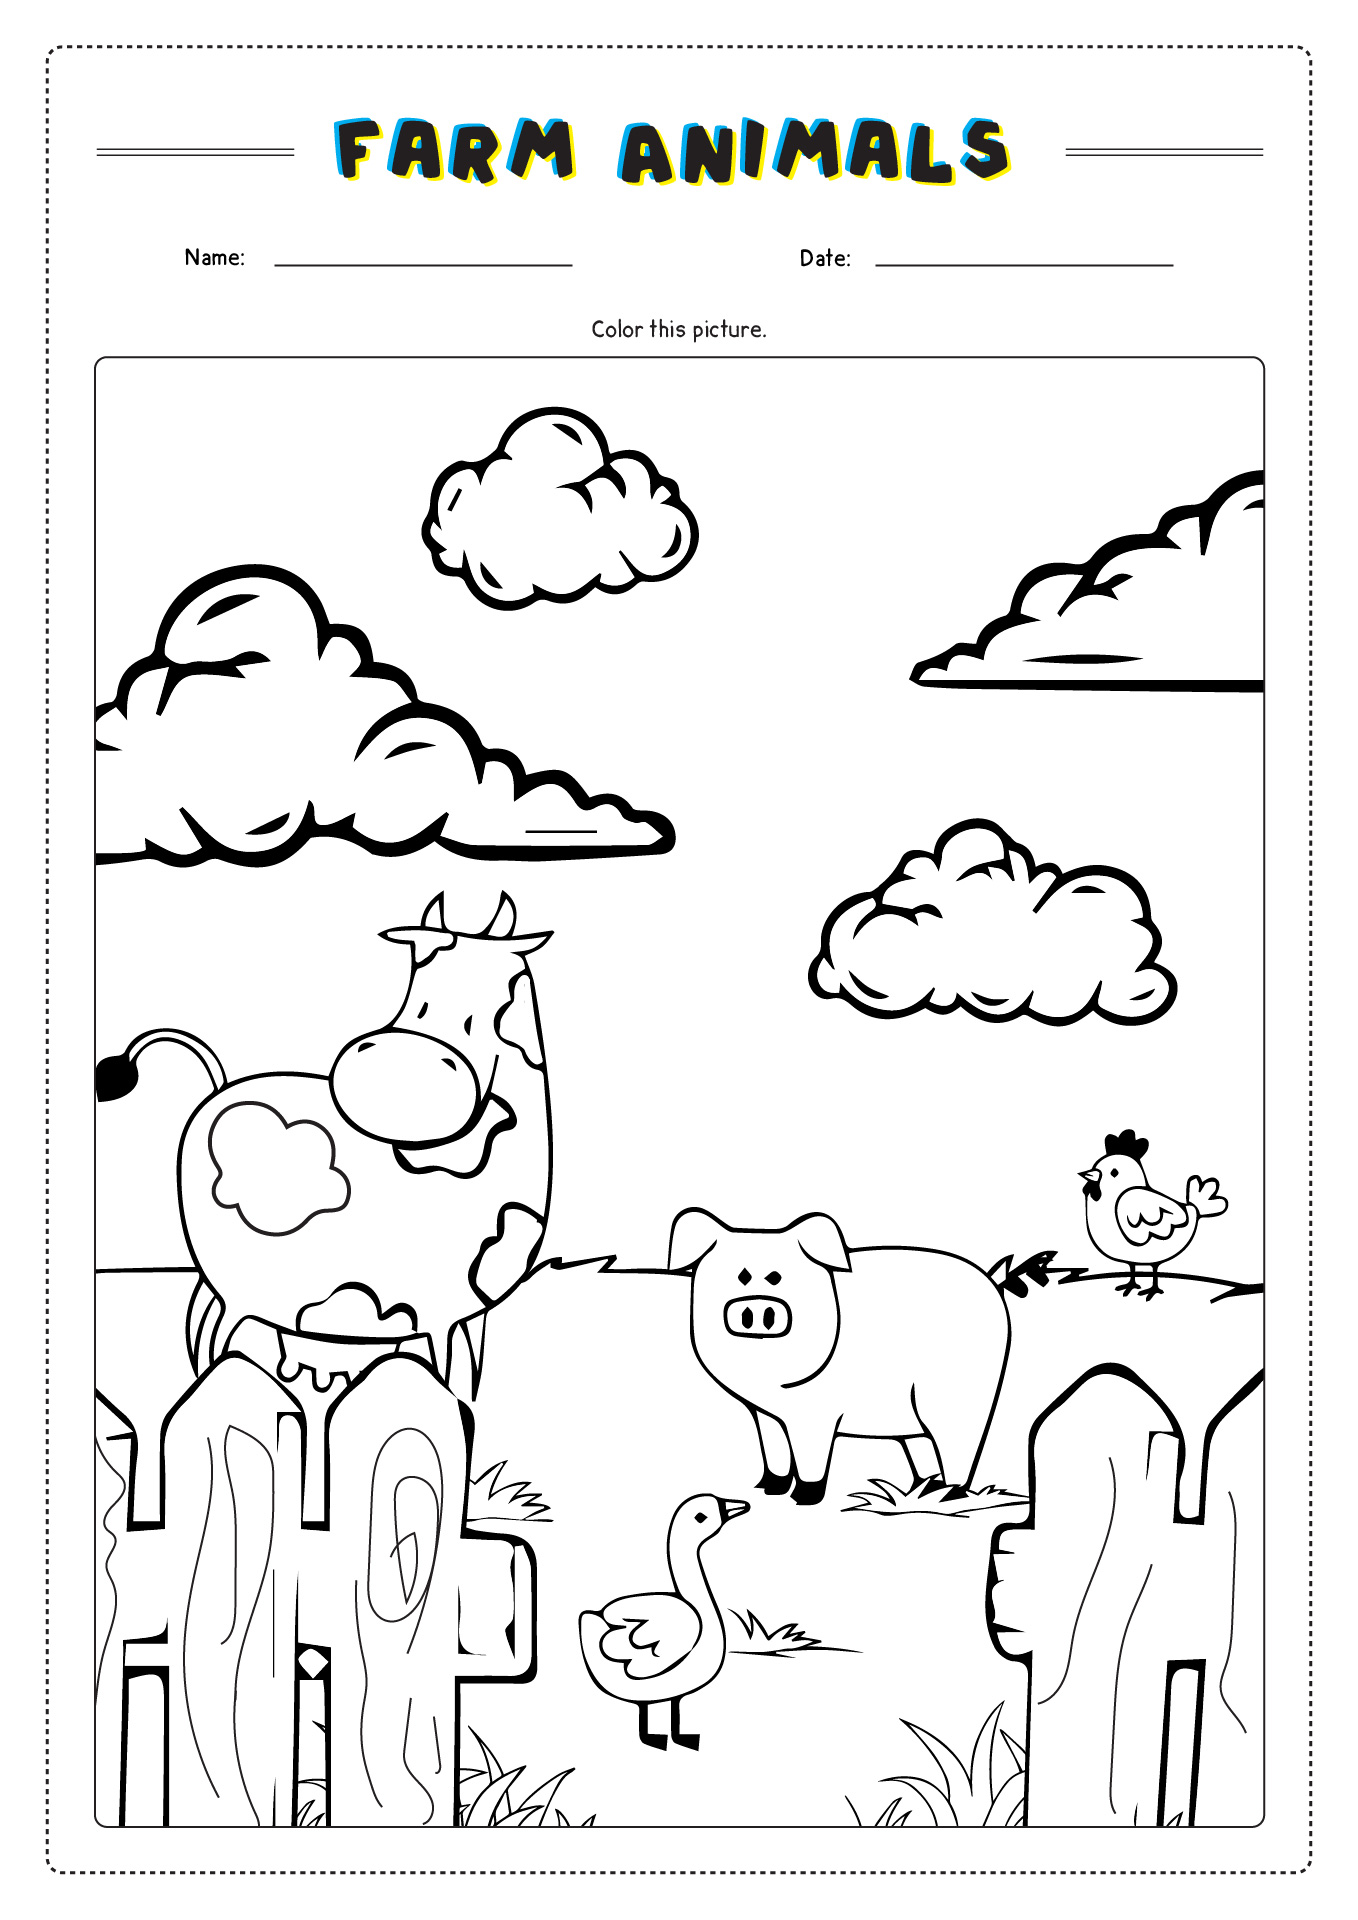 coloring-farm-animals-worksheets-for-kindergarten-here-are-two-great